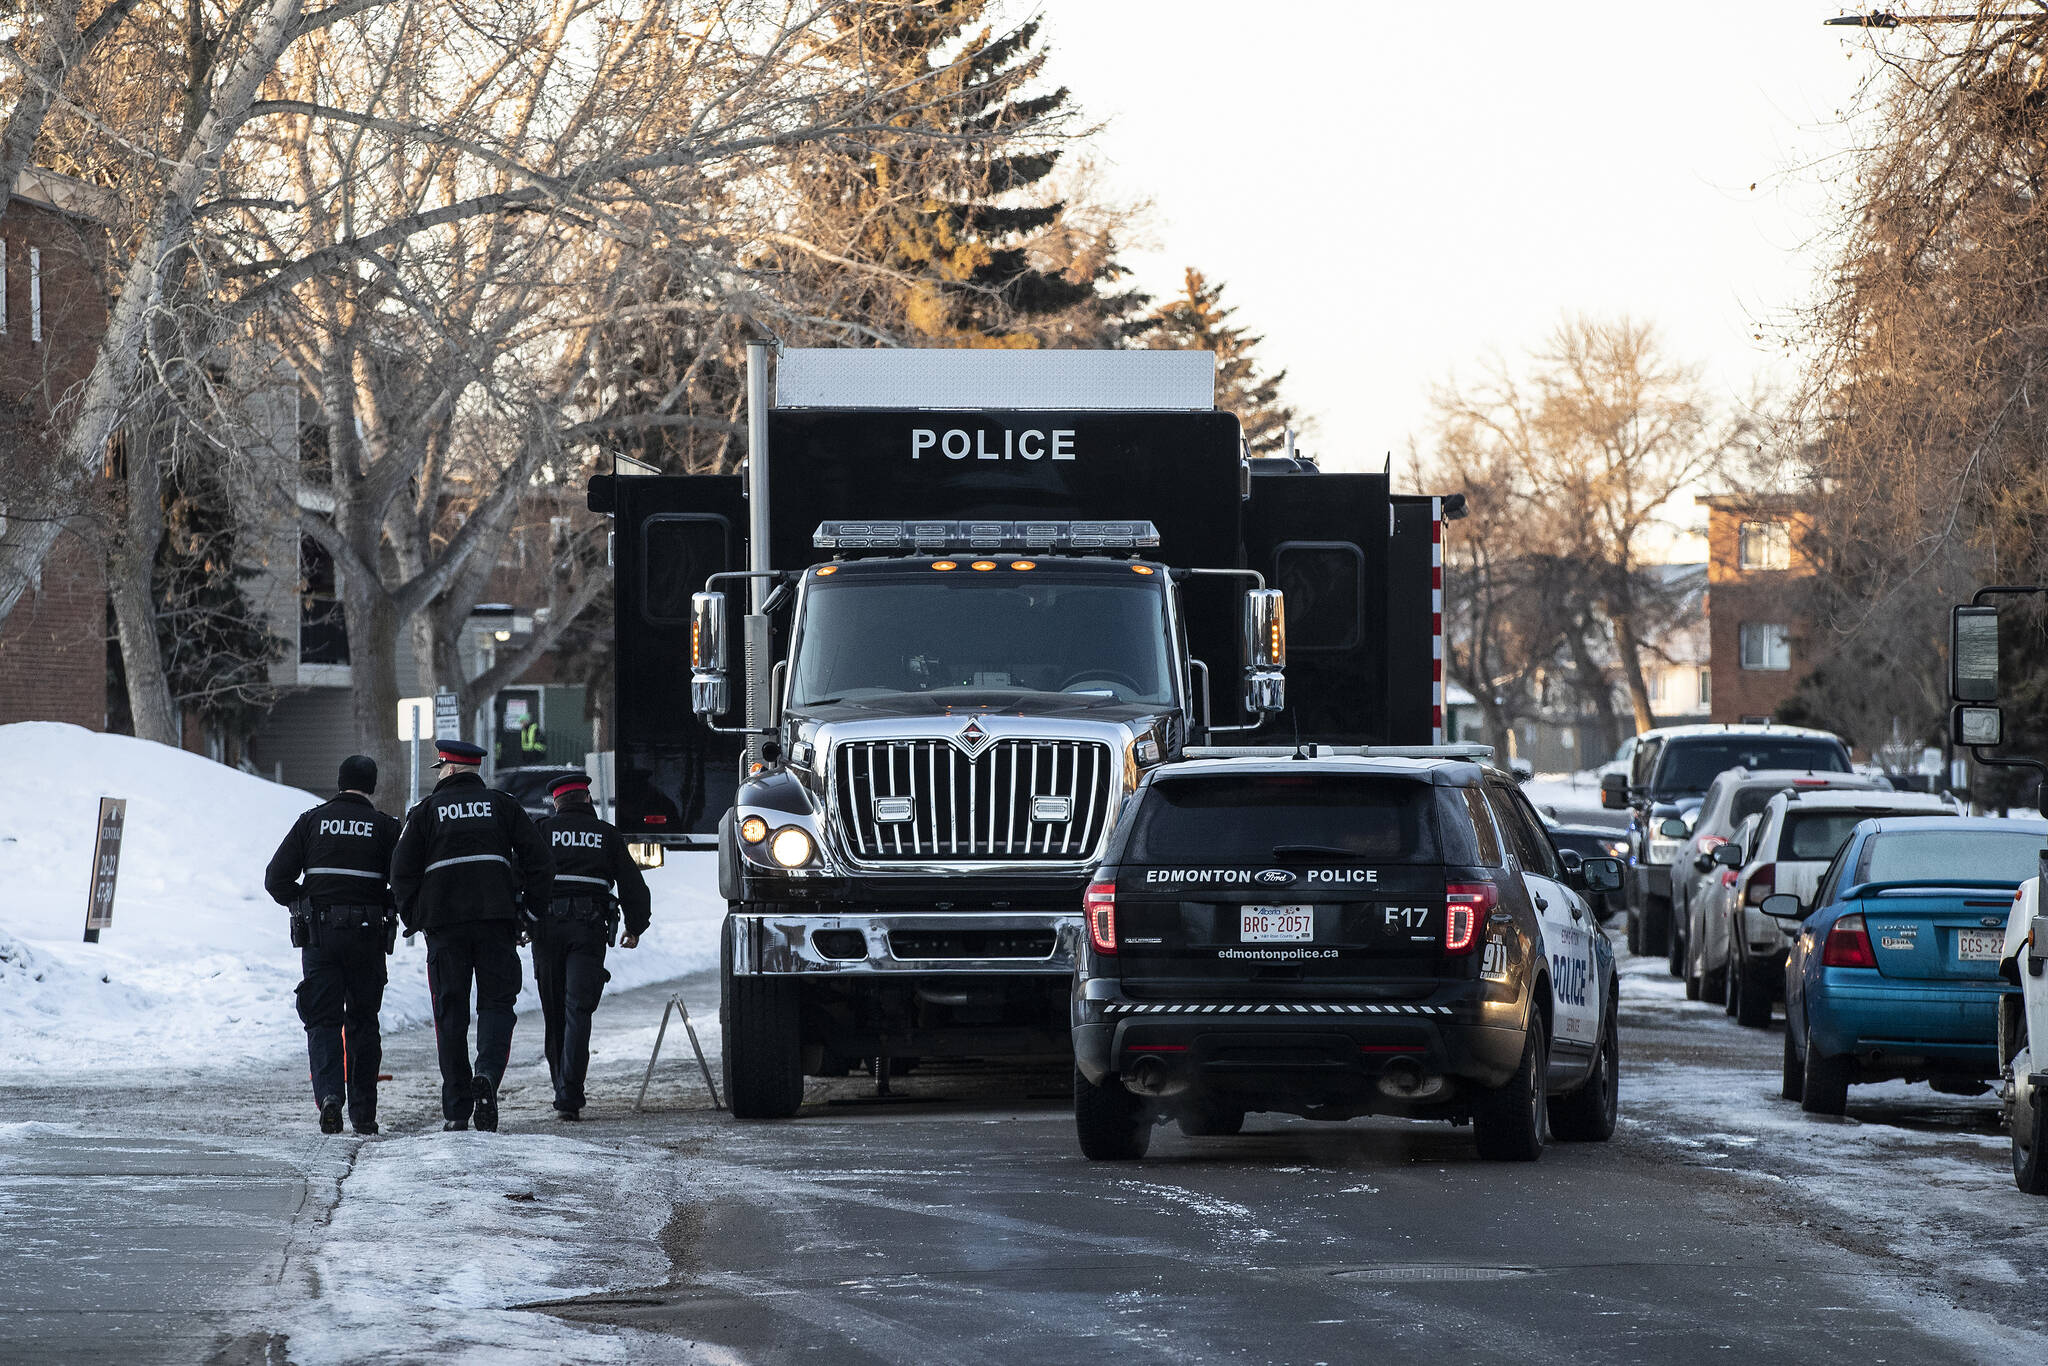 Police investigate the scene where two officers were shot and killed on duty in Edmonton on Thursday, March 16, 2023. THE CANADIAN PRESS/Jason Franson